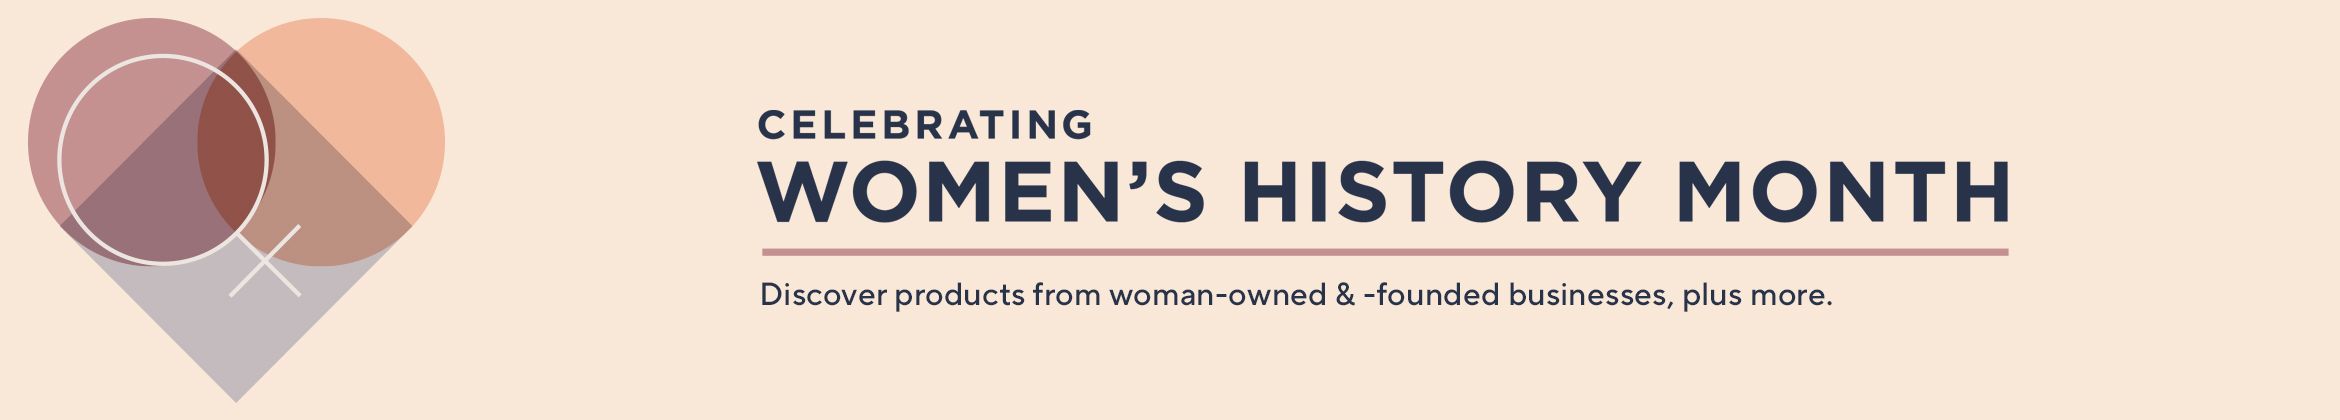 Celebrating Women's History Month - Discover products from woman-owned & -founded businesses, plus more.